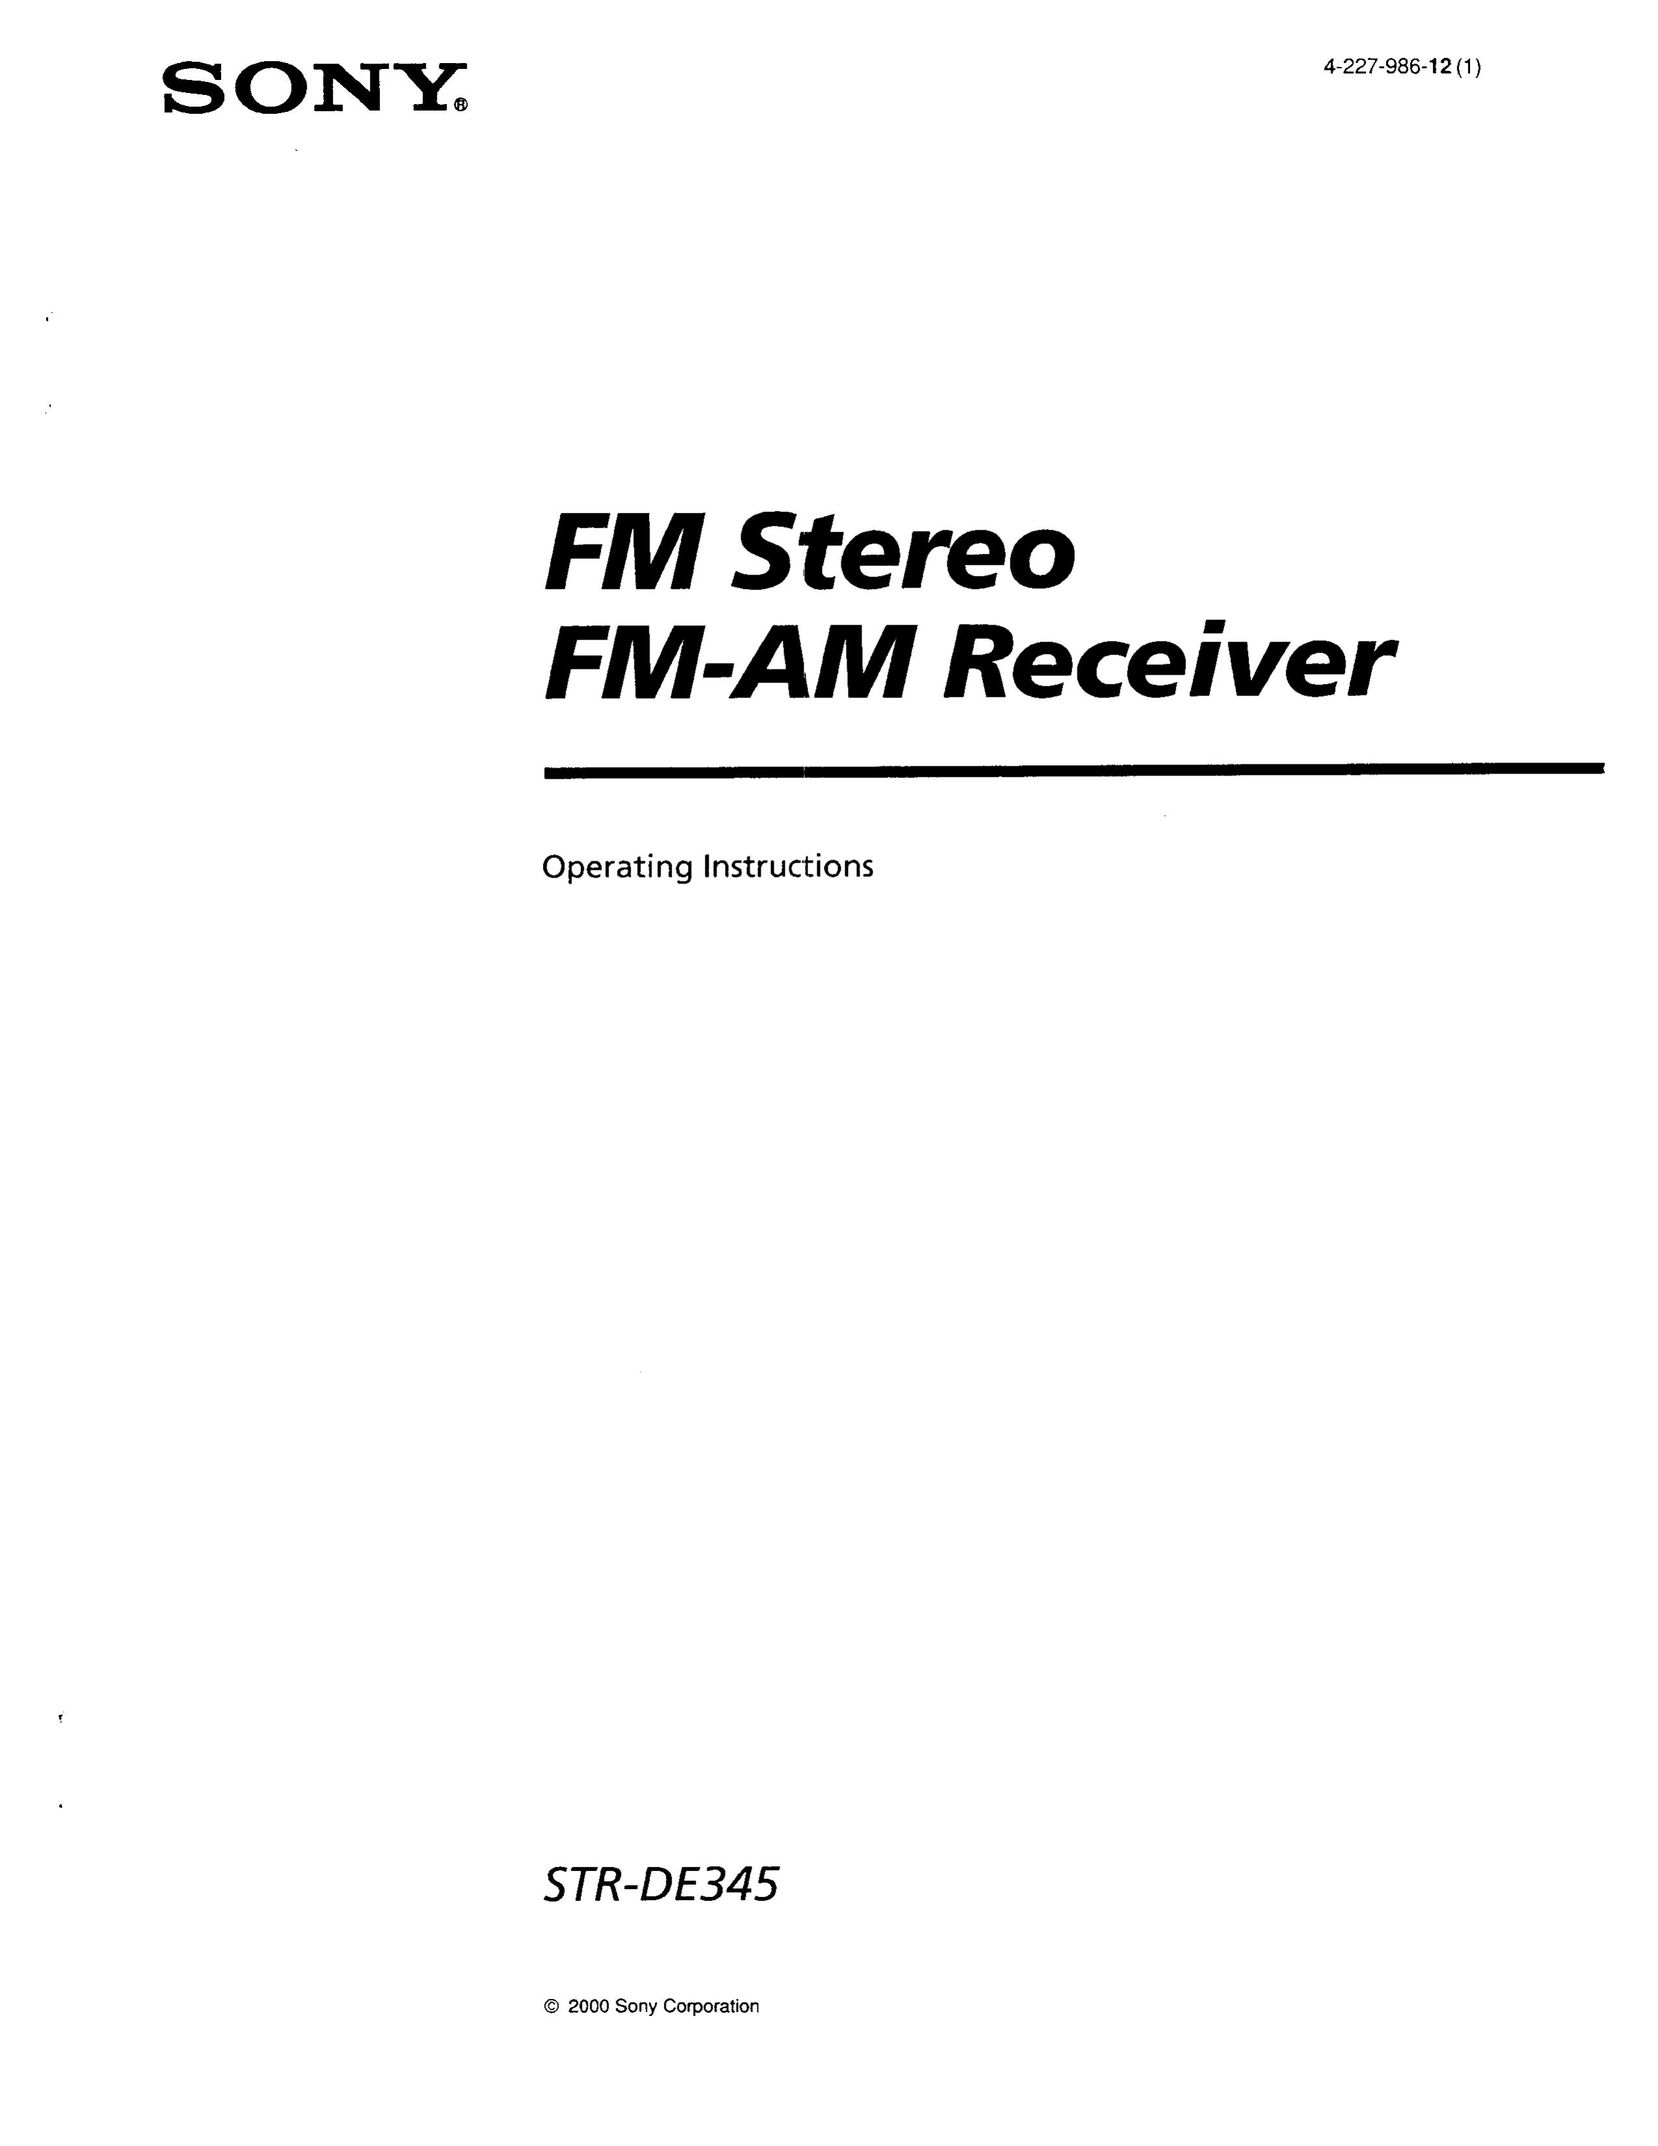 Sony 4-227-986-12(1) Stereo Receiver User Manual